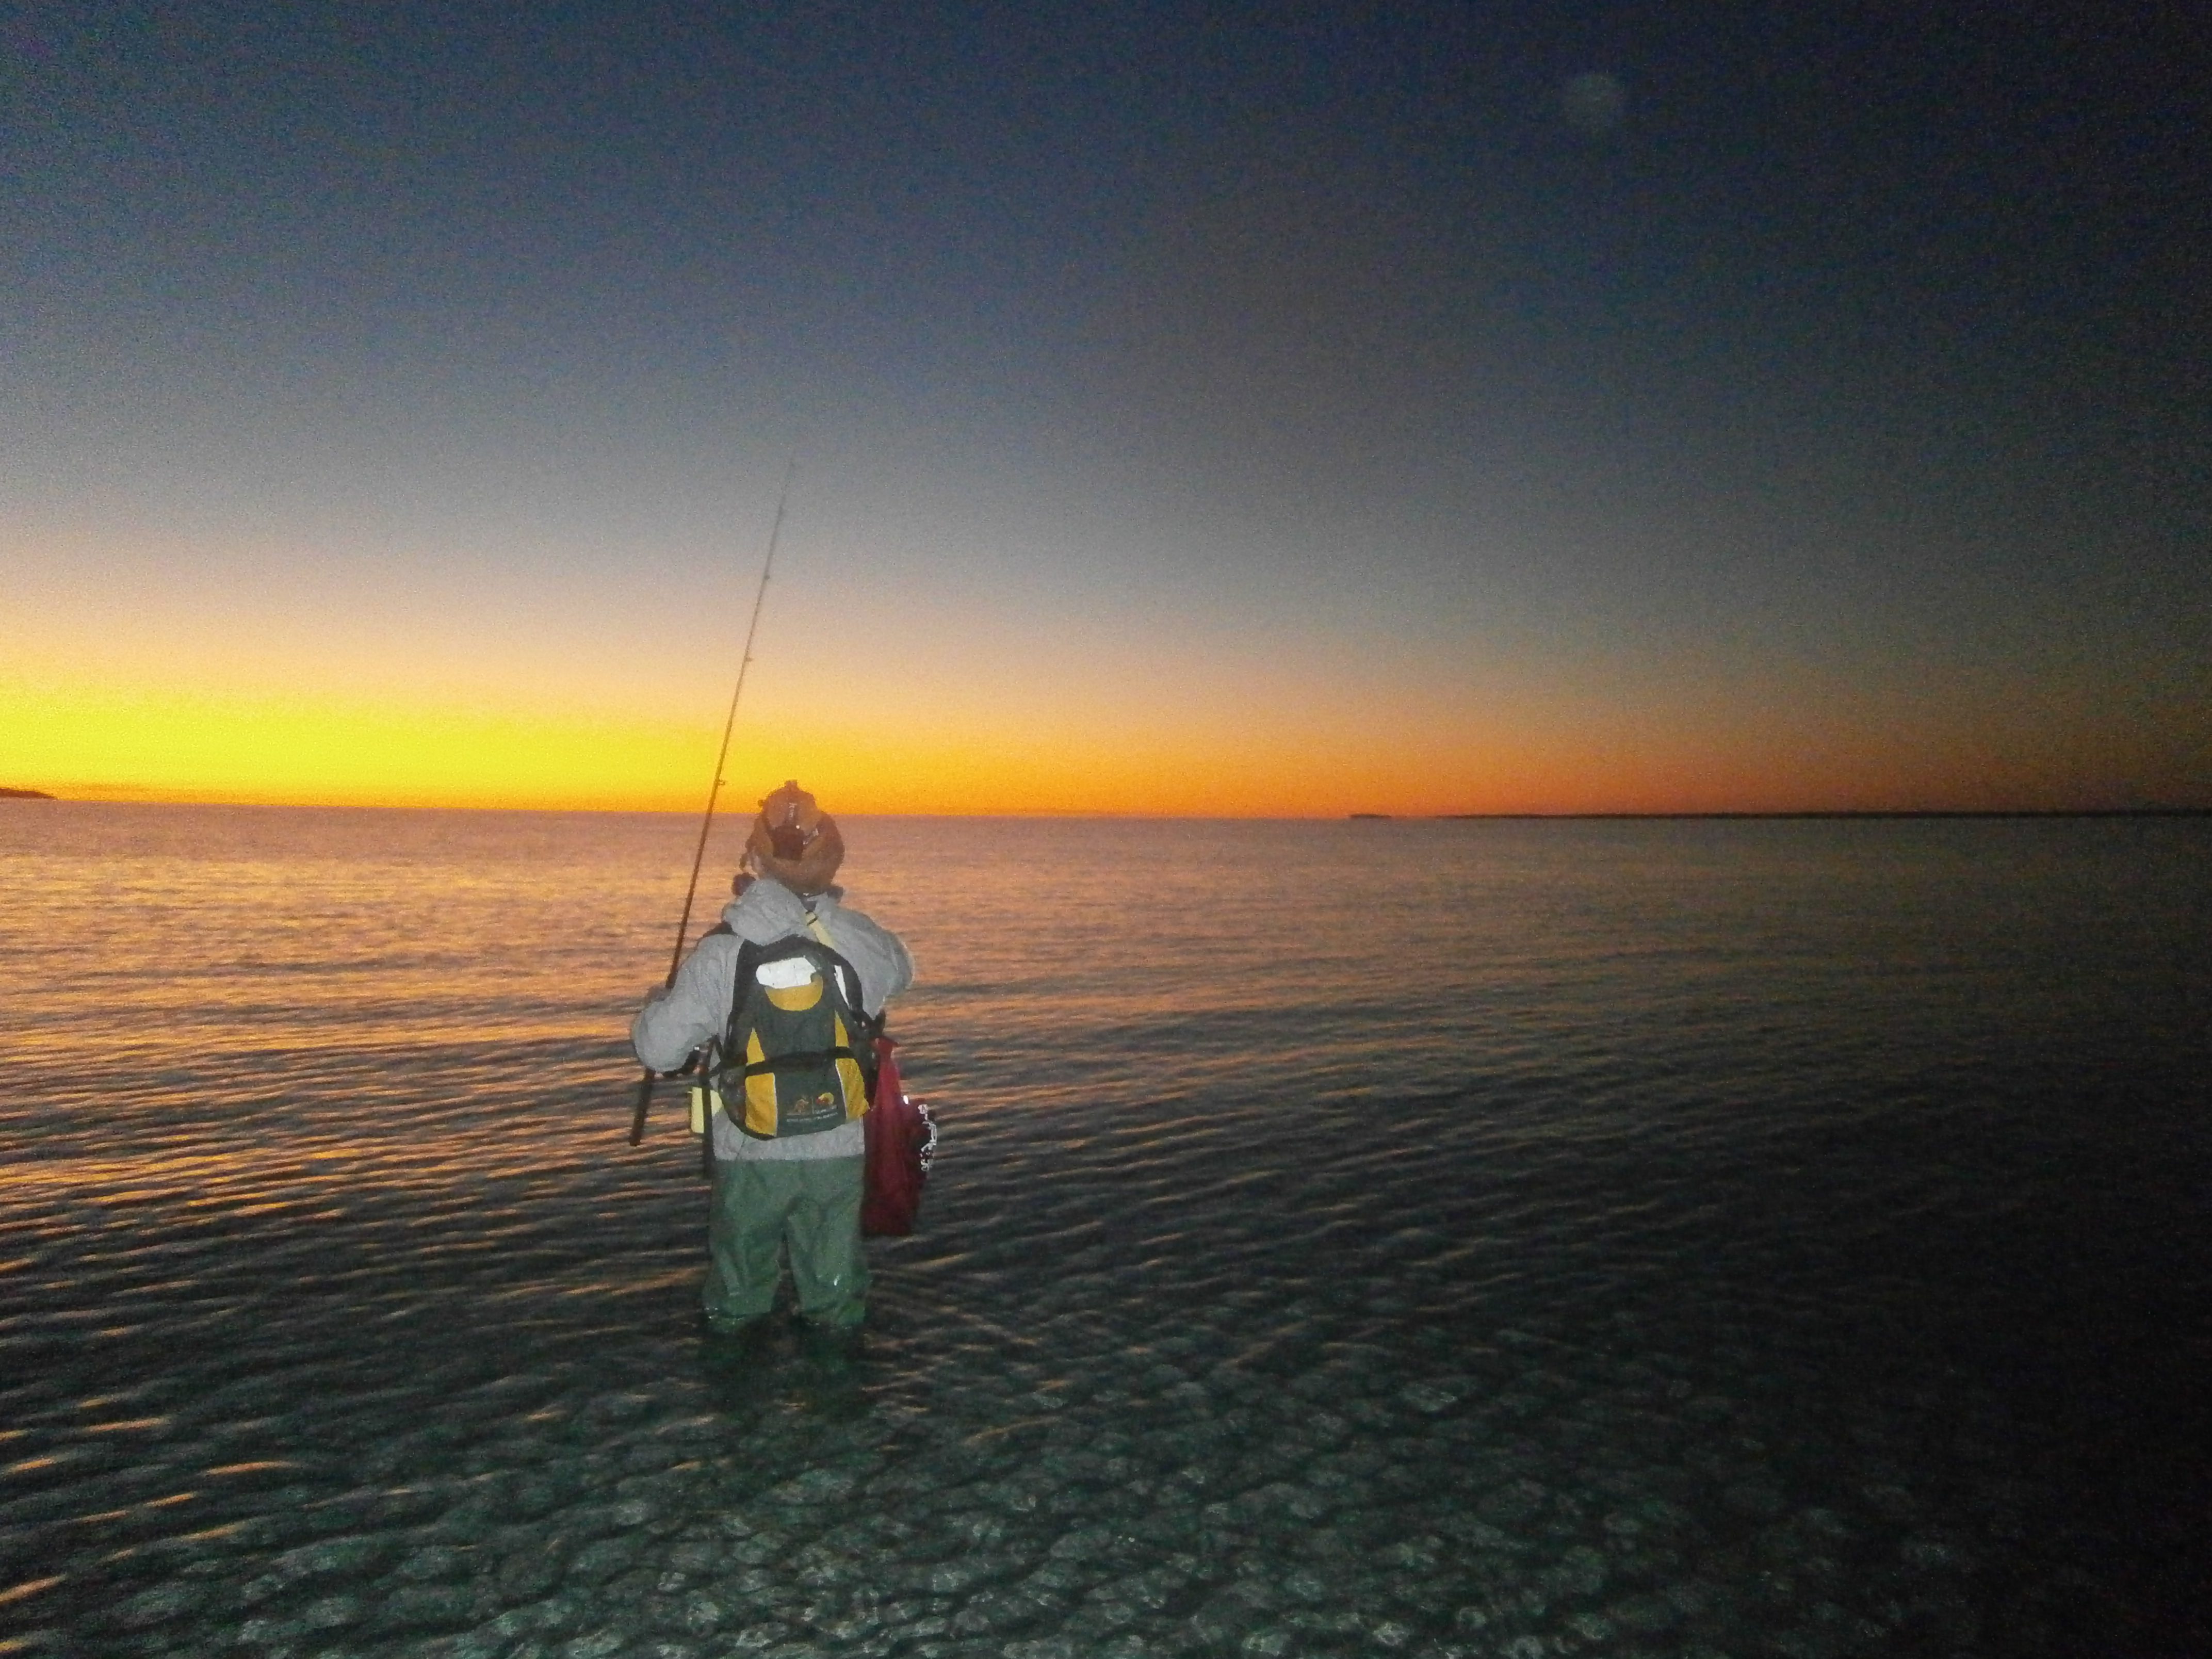 Sunset on a successful session catching whiting on Fraser’s western side.